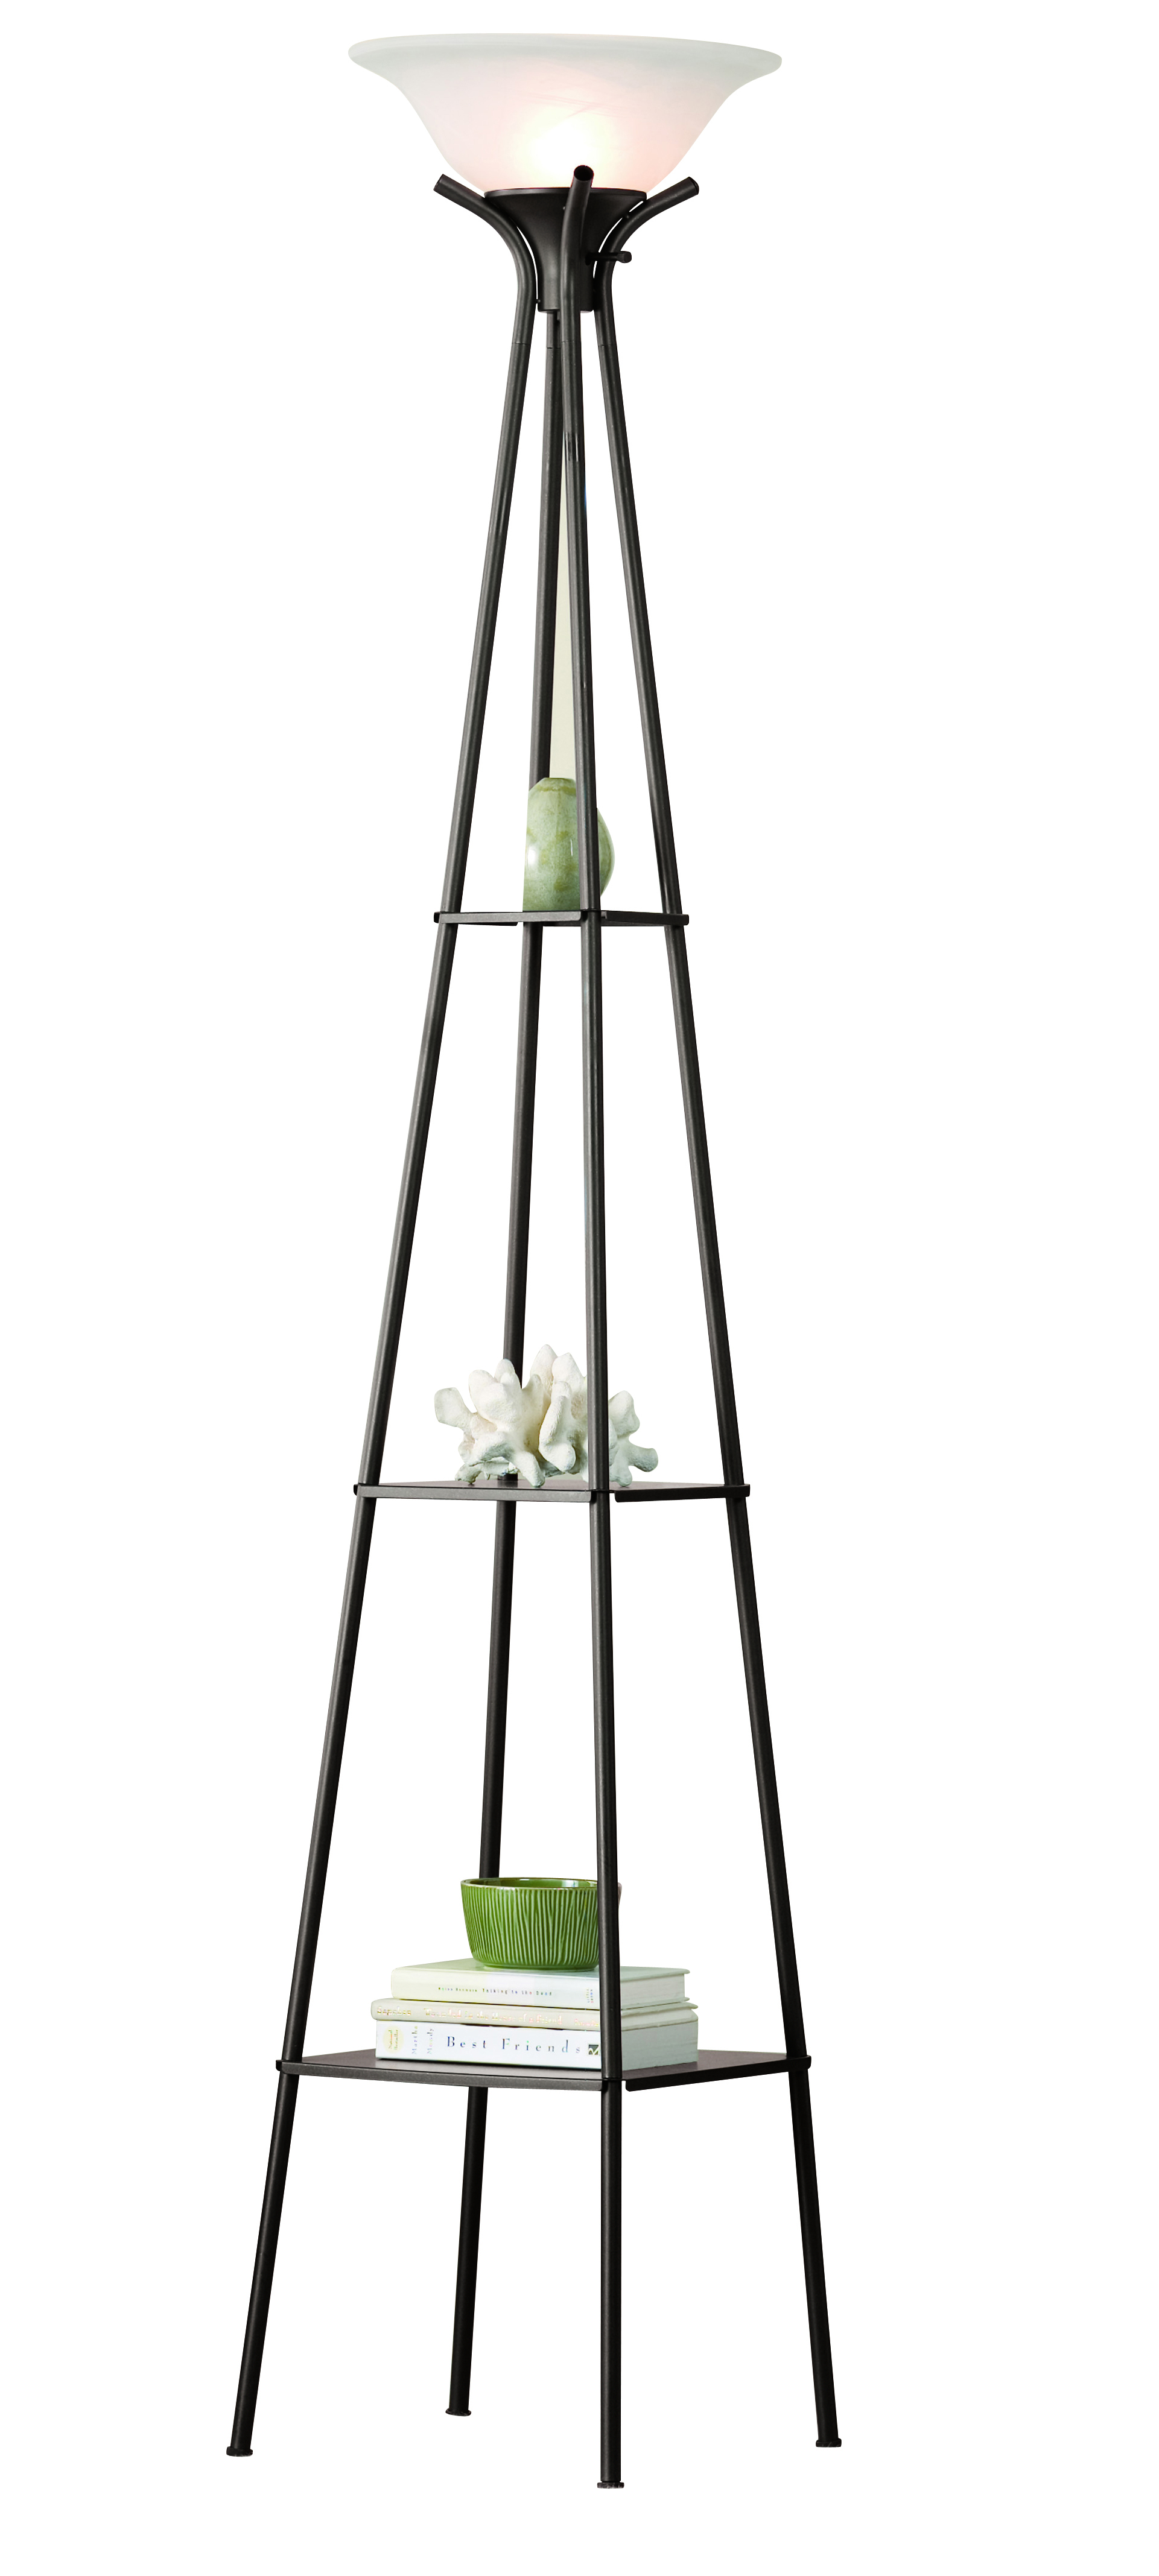 Mainstays 69 Etagere Floor Lamp Dark Charcoal Finish Walmart with regard to dimensions 1921 X 4271